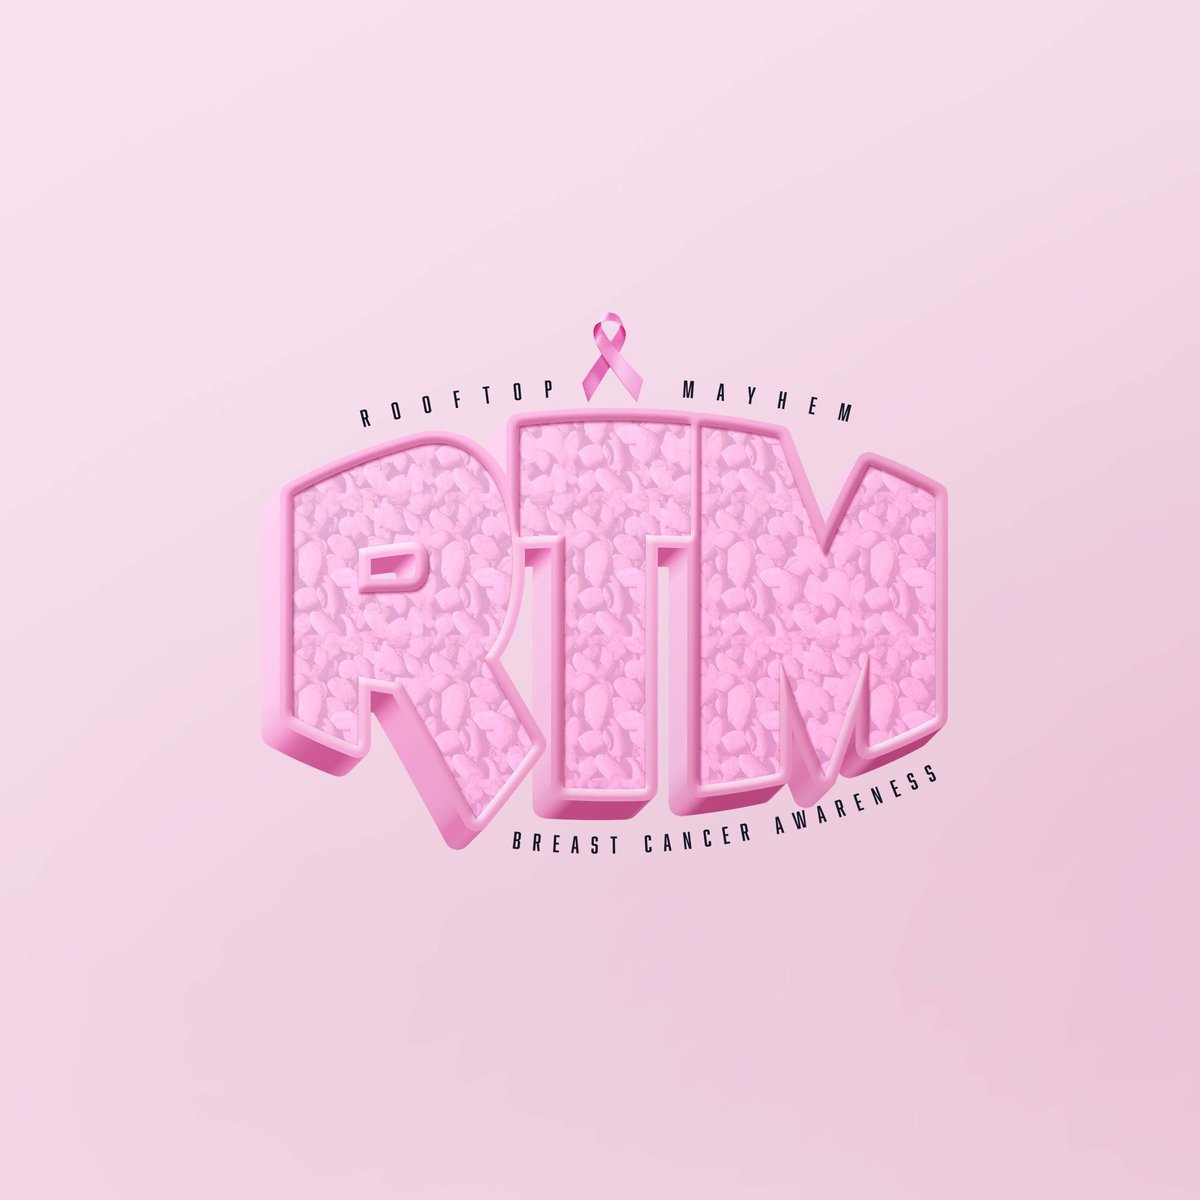 Breast Cancer Awareness Month is coming up in October 🙏🏾🩷 @RTmayhem believes in support ☝🏾

#BREASTCANCER 🩷
#WeStandWithYOU 🫶🏾